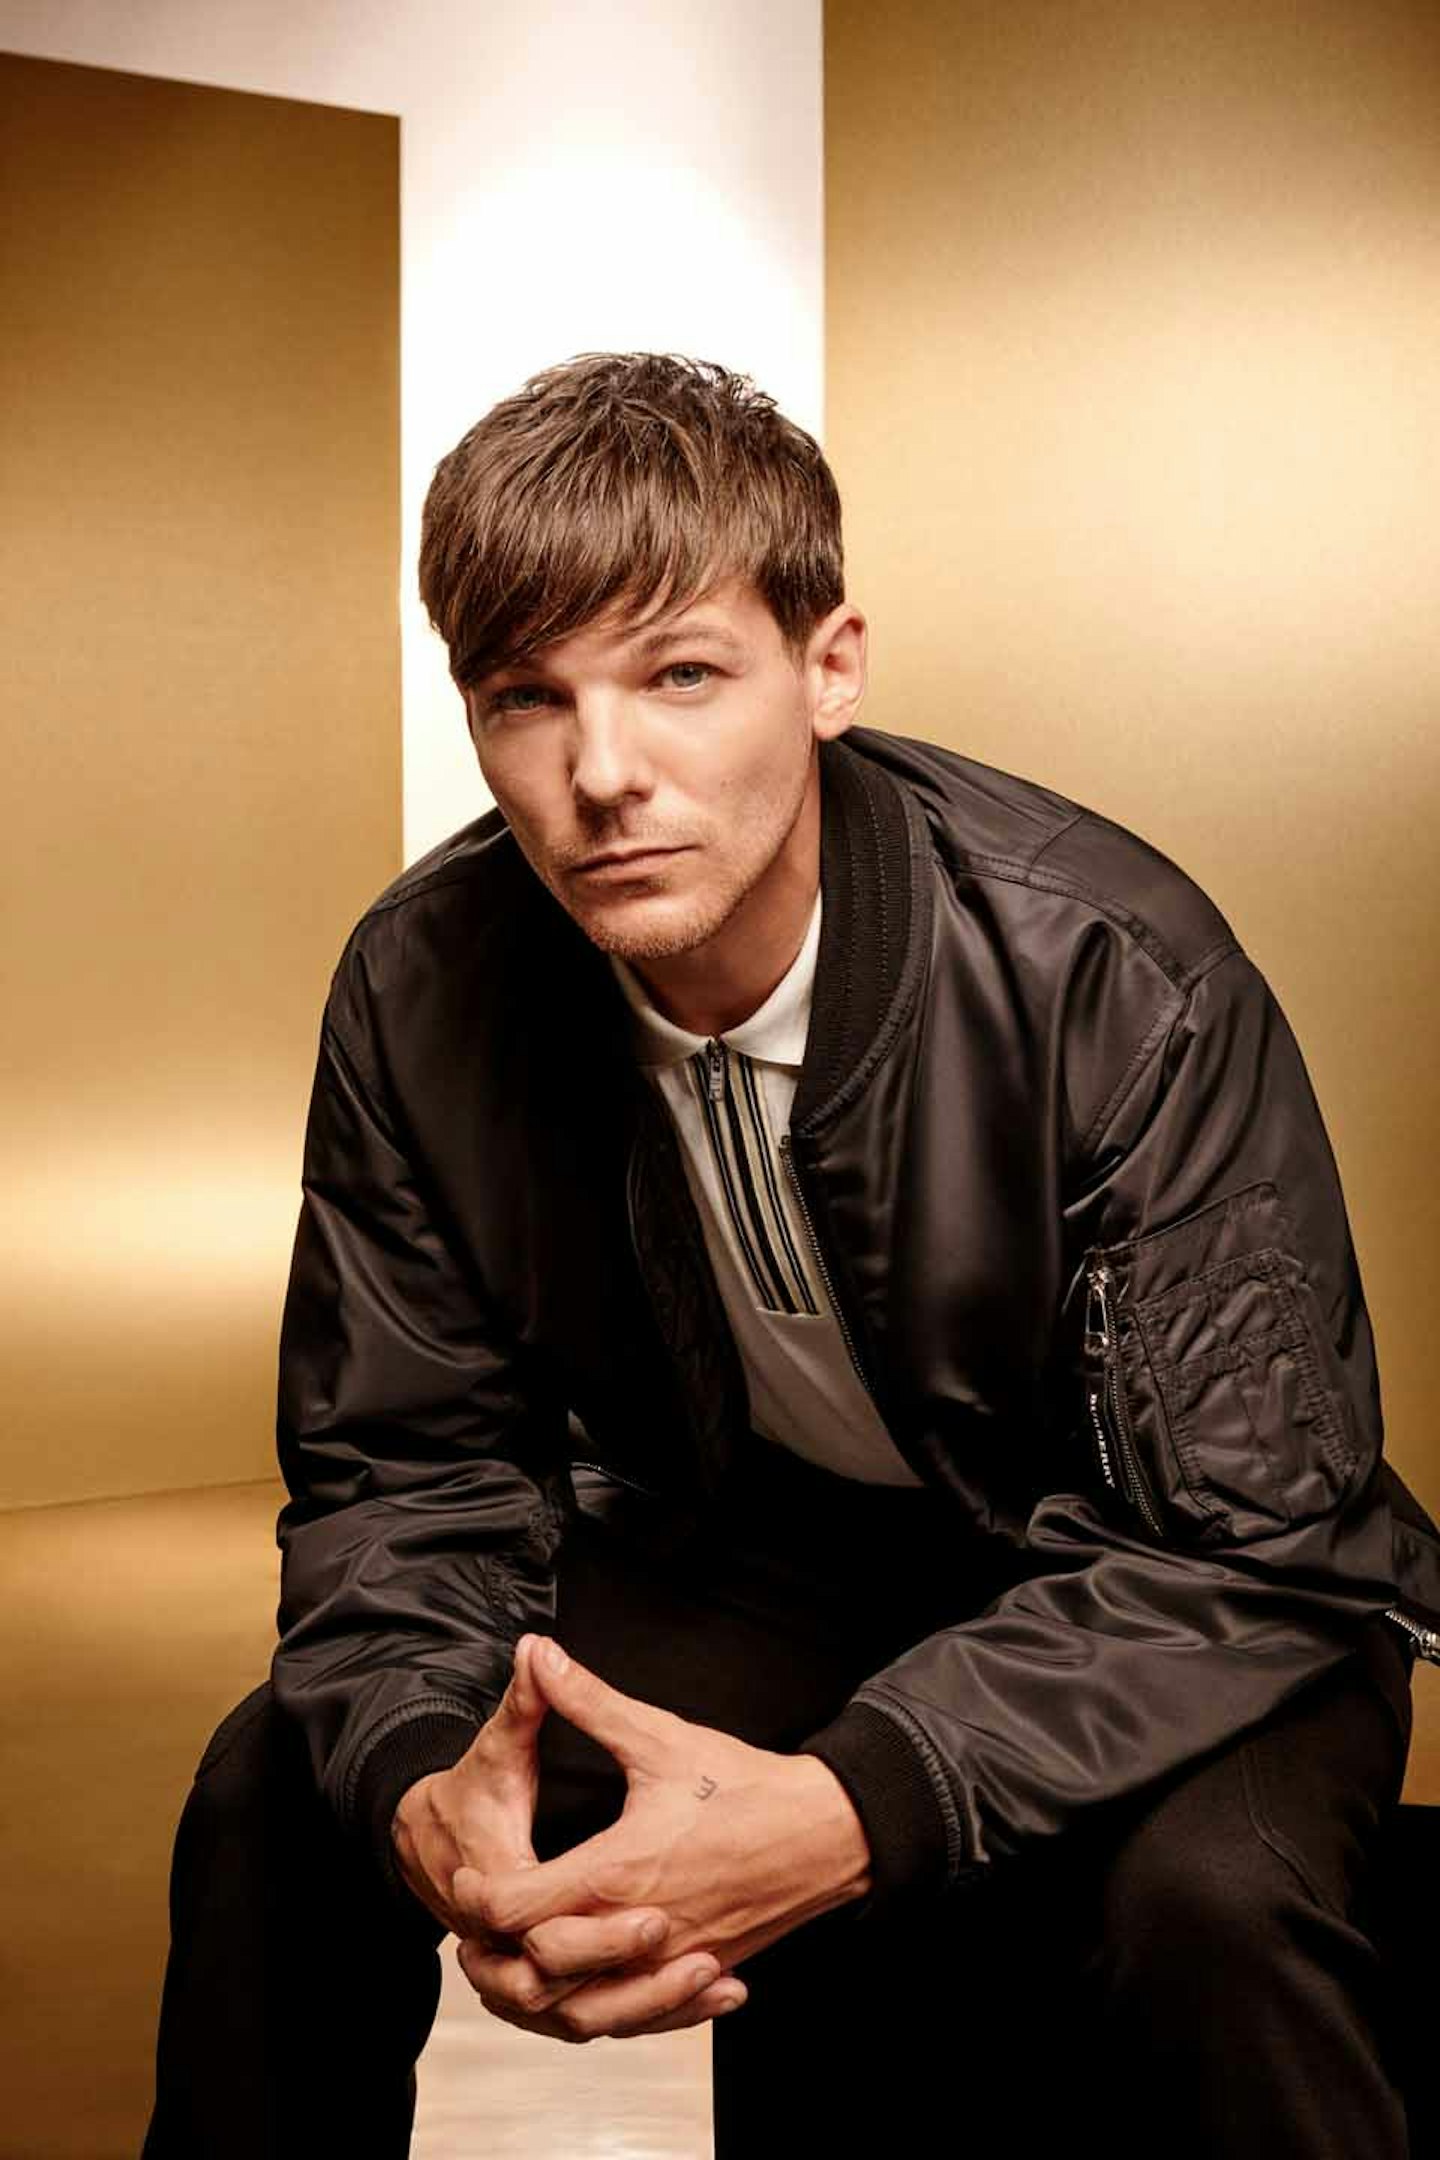 Louis Tomlinson is now a judge on The X Factor